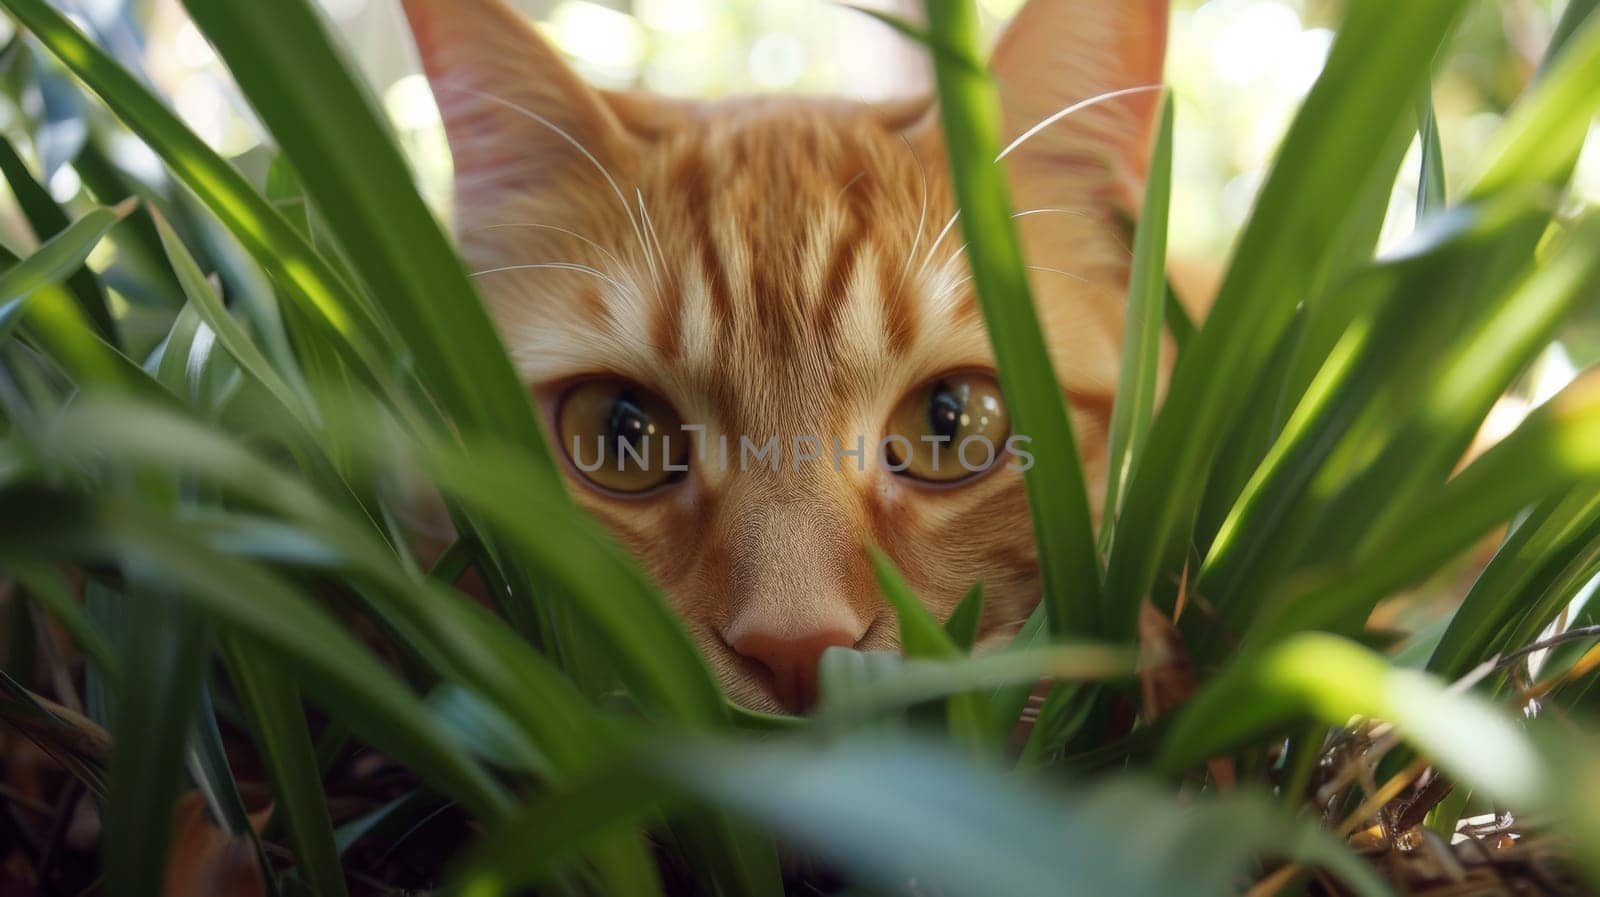 A cat peeking out from behind a bunch of green grass